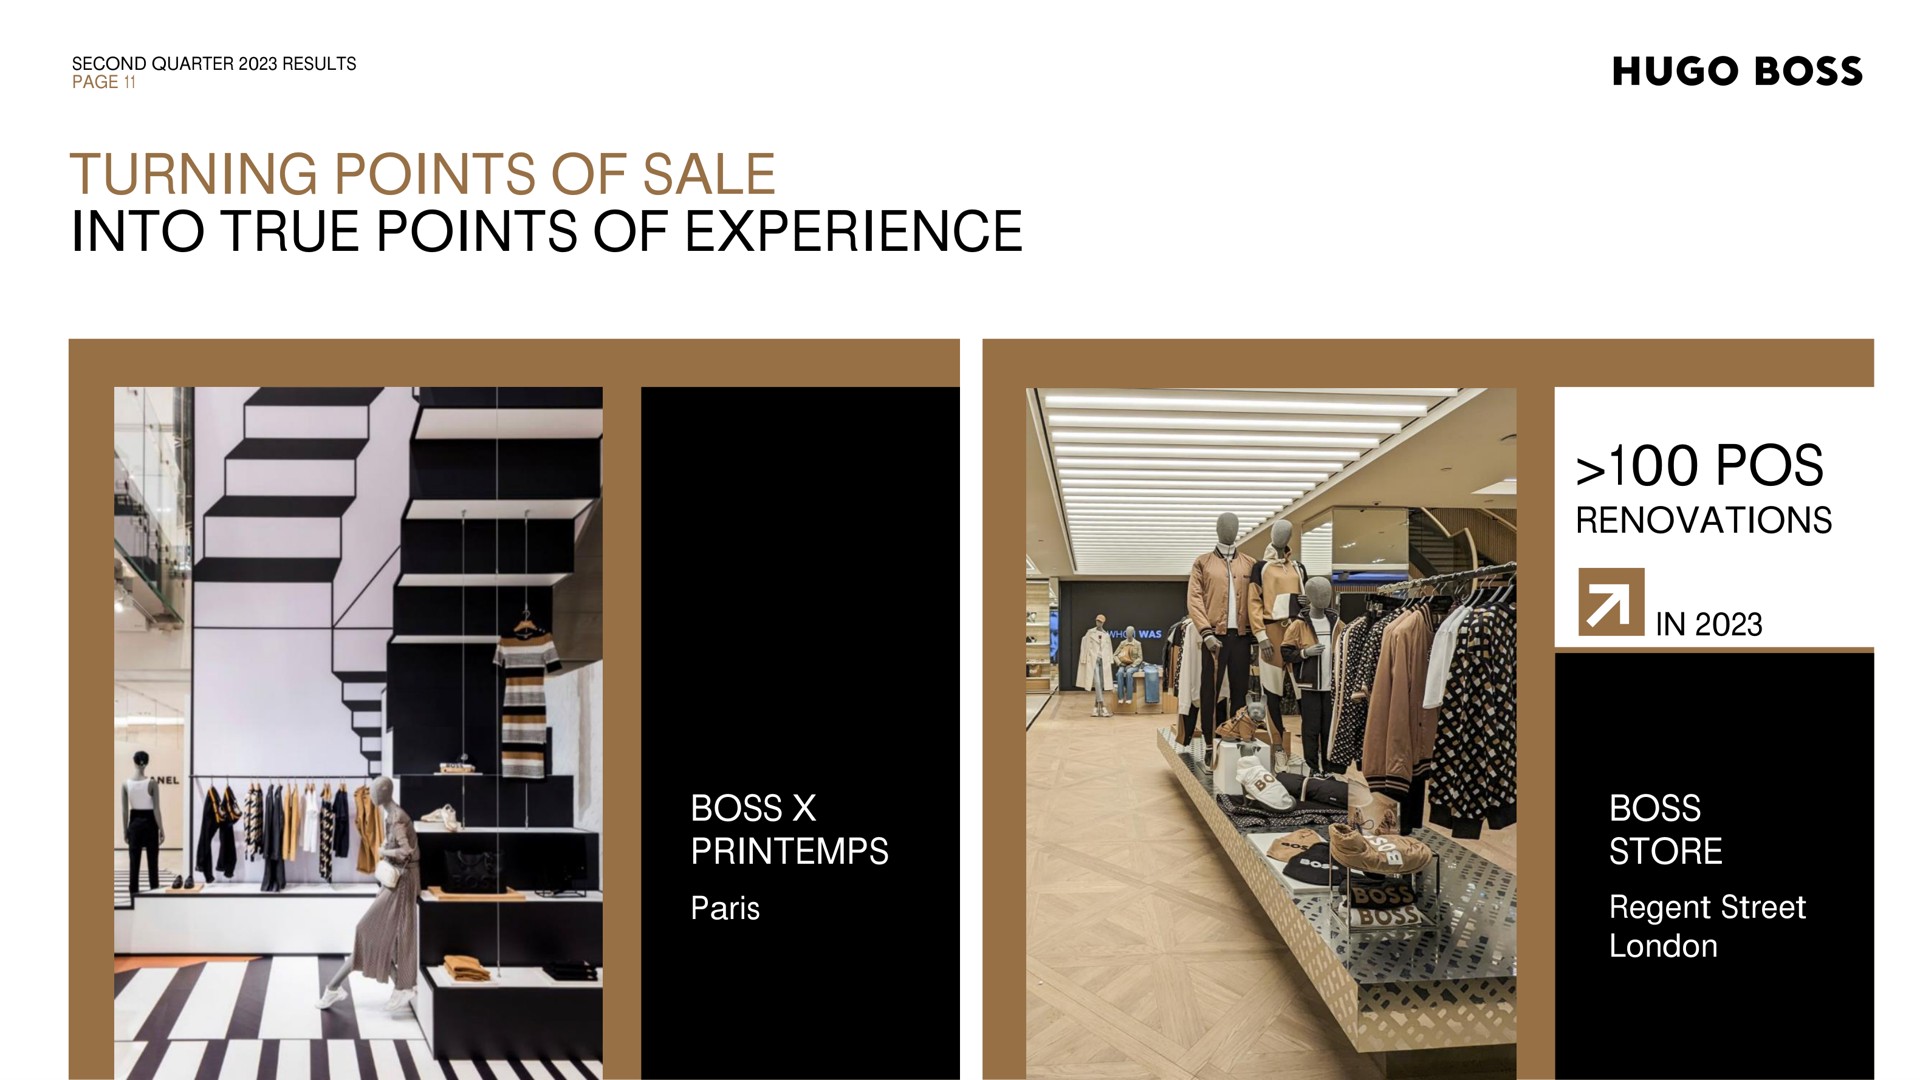 second quarter results first quarter results page turning points of sale into true points of experience boss pos renovations in boss store regent street res | Hugo Boss